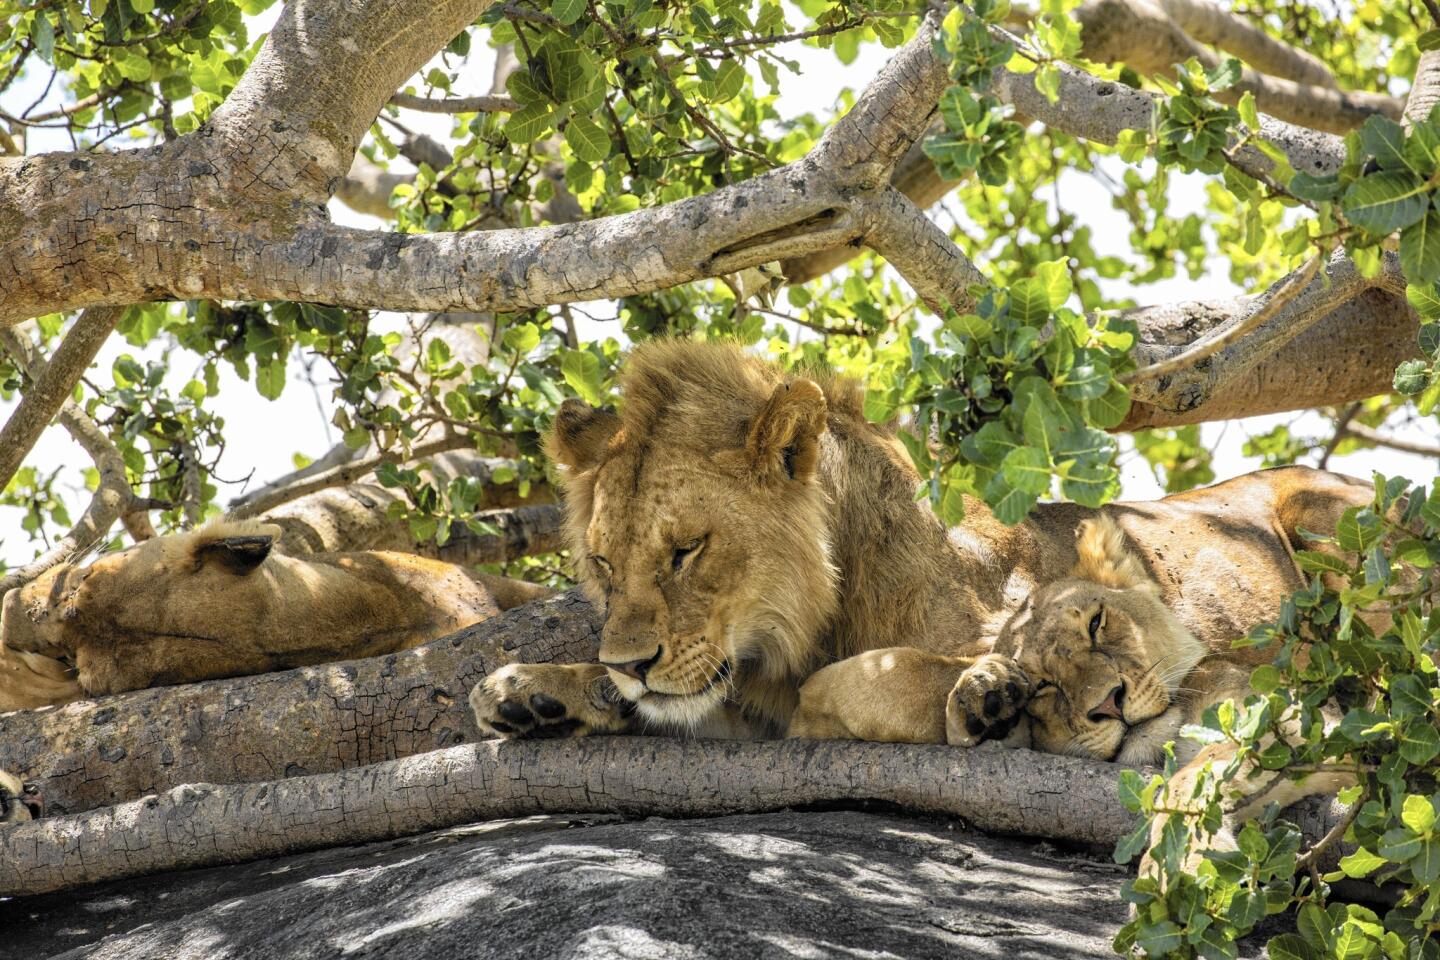 Lions rest in the shade atop rocks in the Namiri Plains area of the Serengeti.